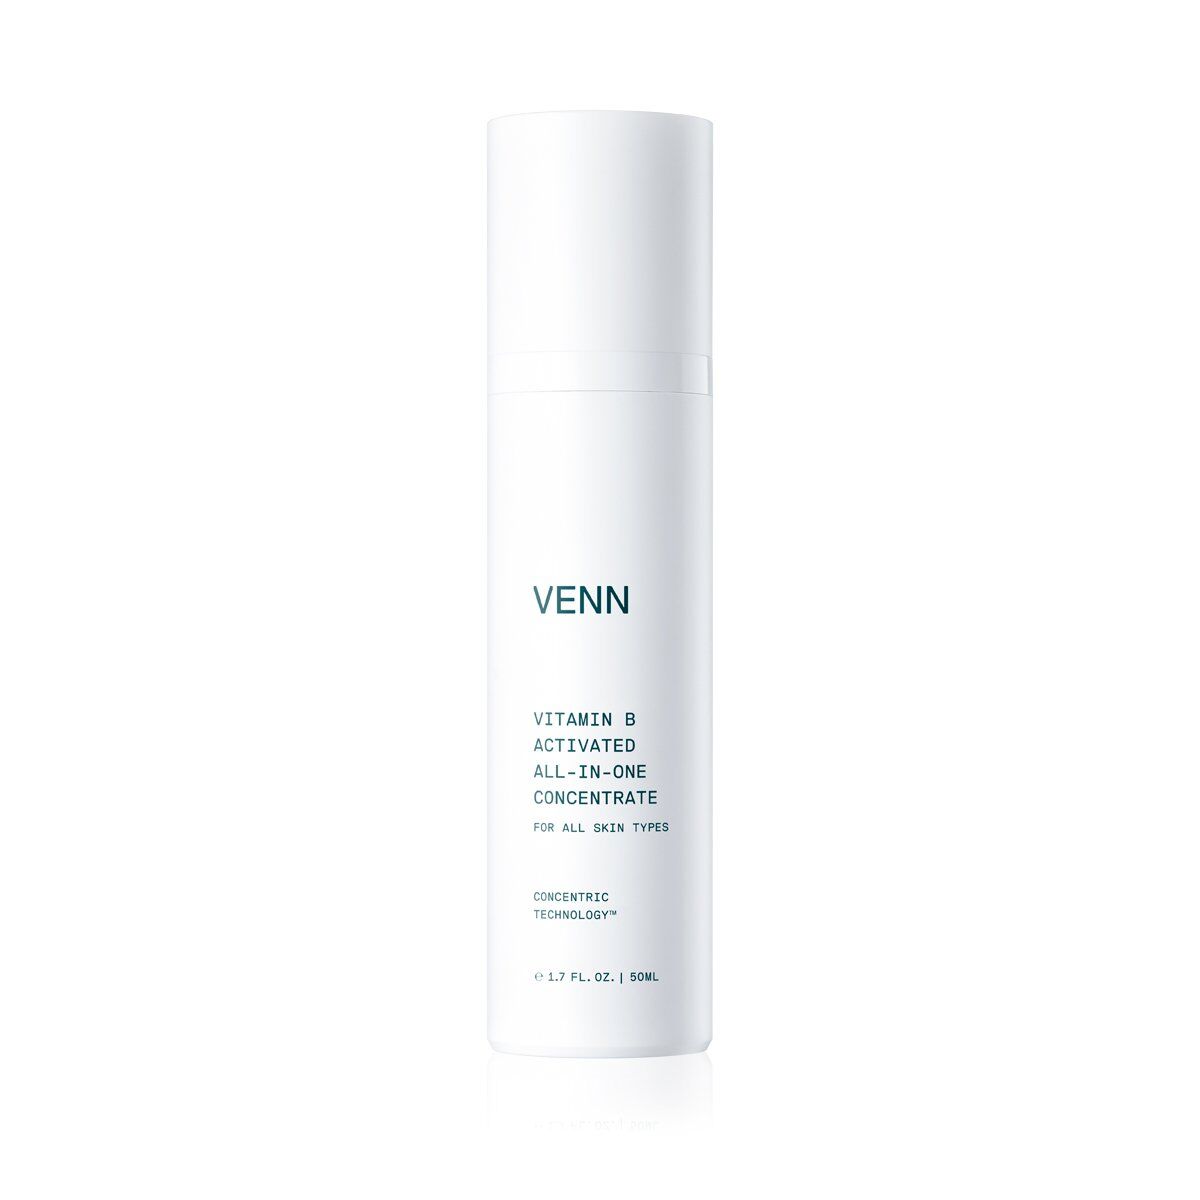 VENN Skincare - Vitamin B Activated All-In-One Concentrate